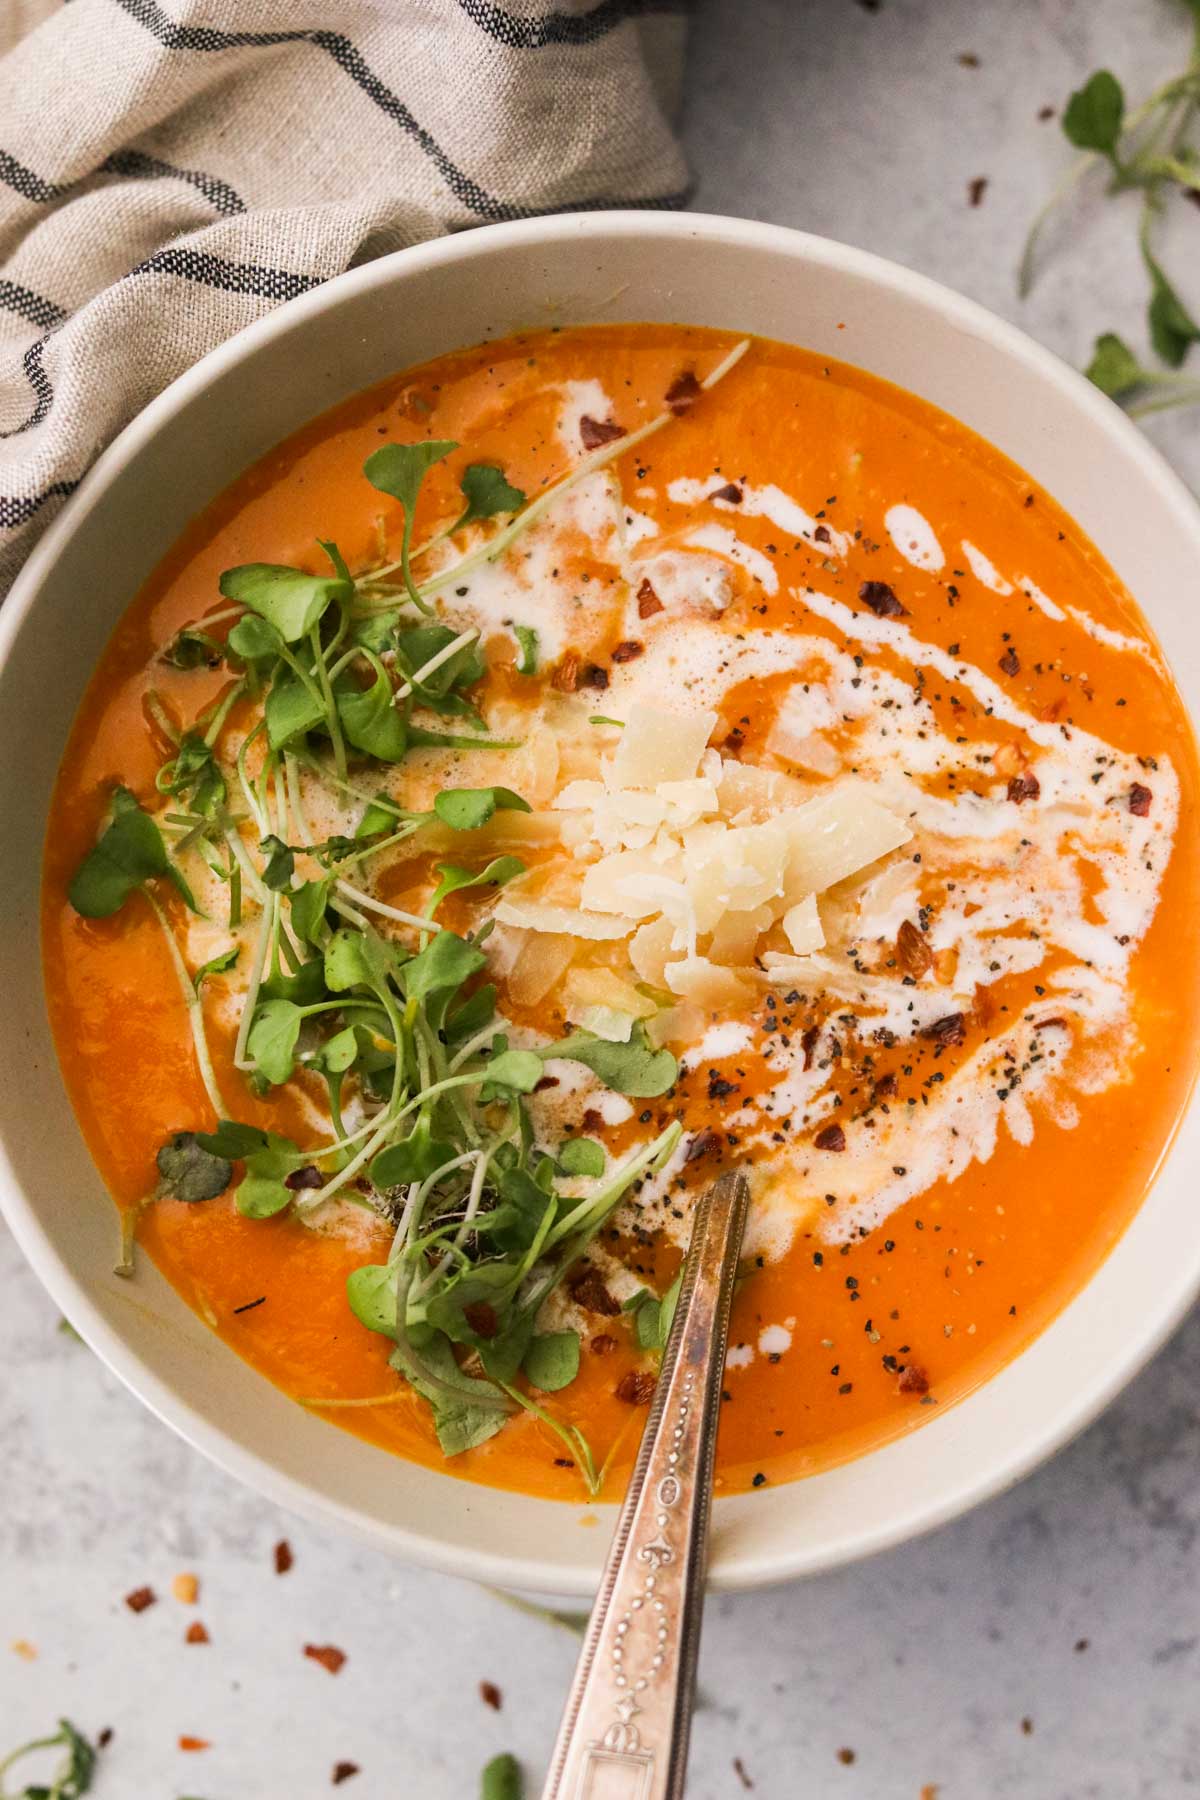 a white bowl filled with a creamy, blended soup and topped with pepper, parmesan cheese, and microgreens